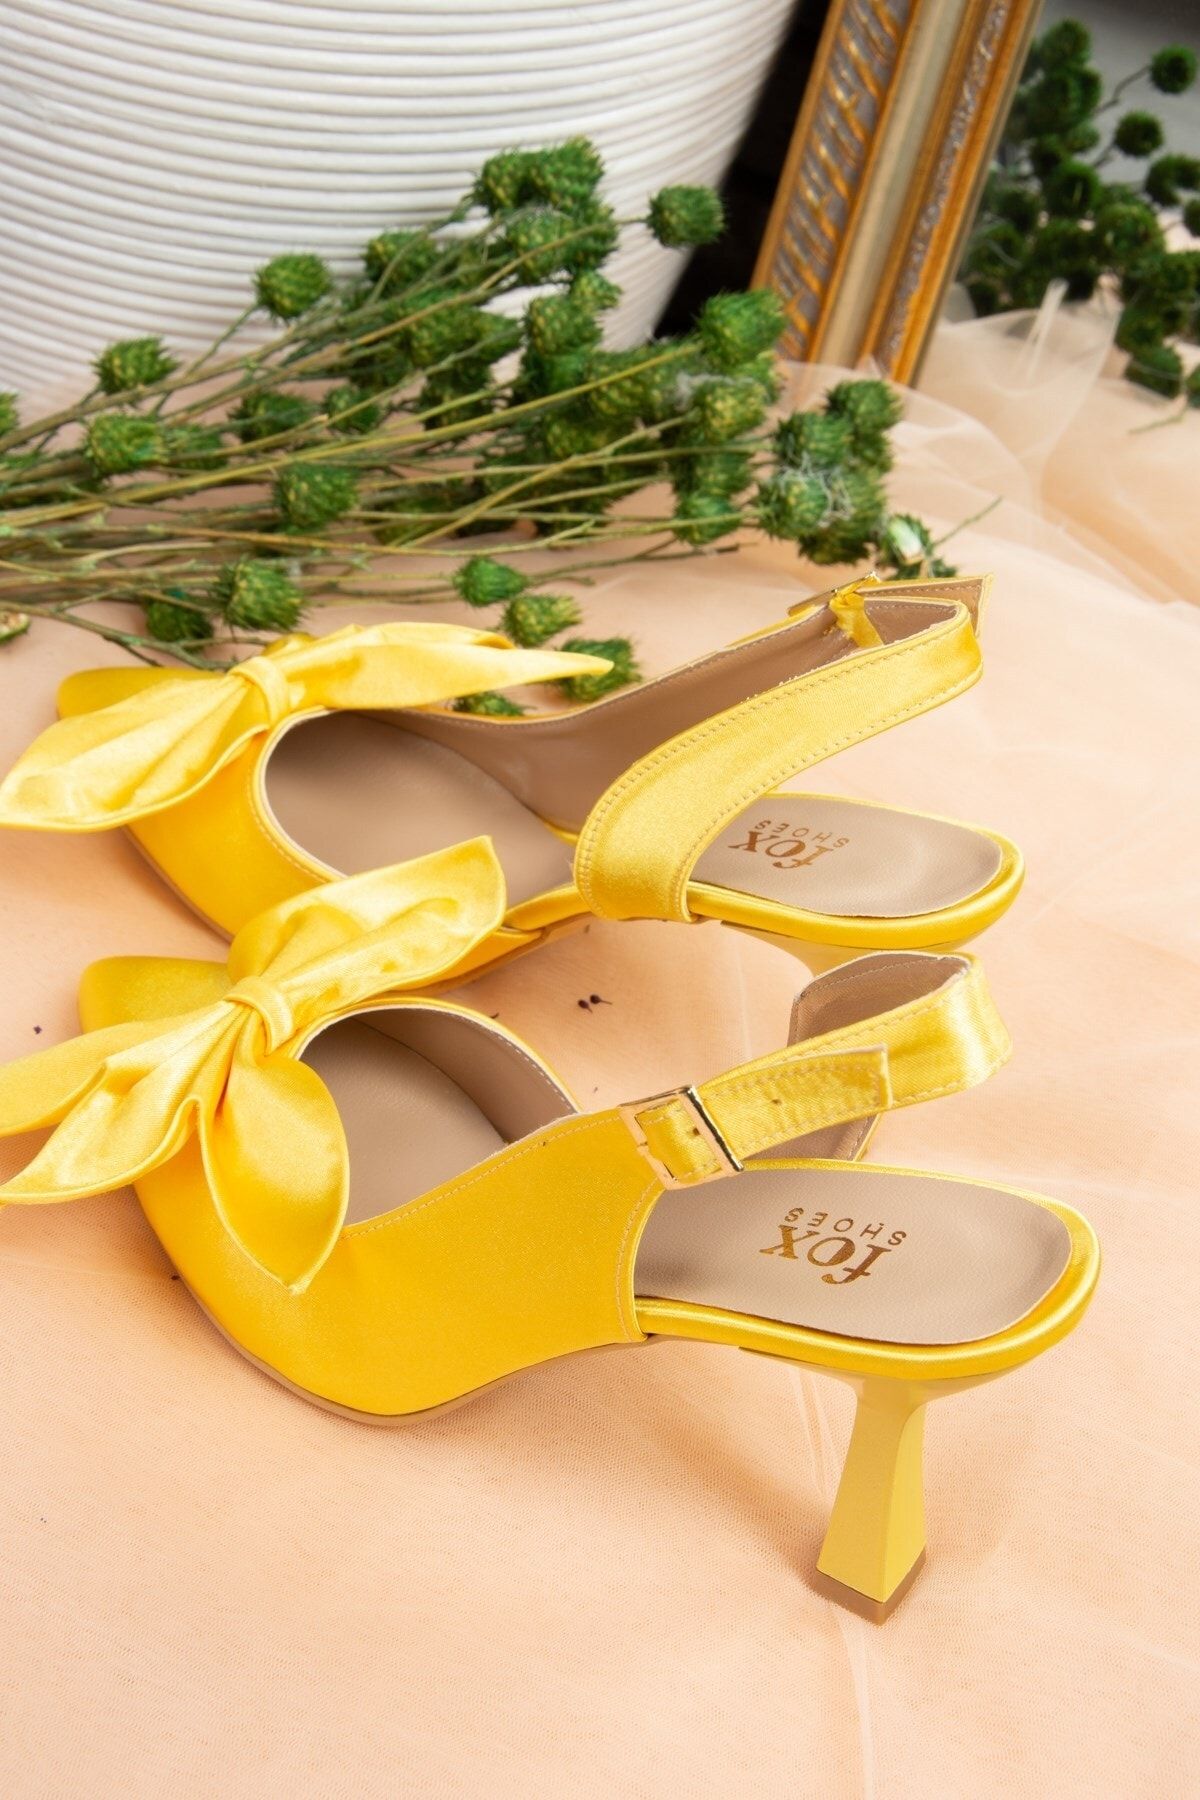 Yellow Slingback Heels with Asymmetric Bow